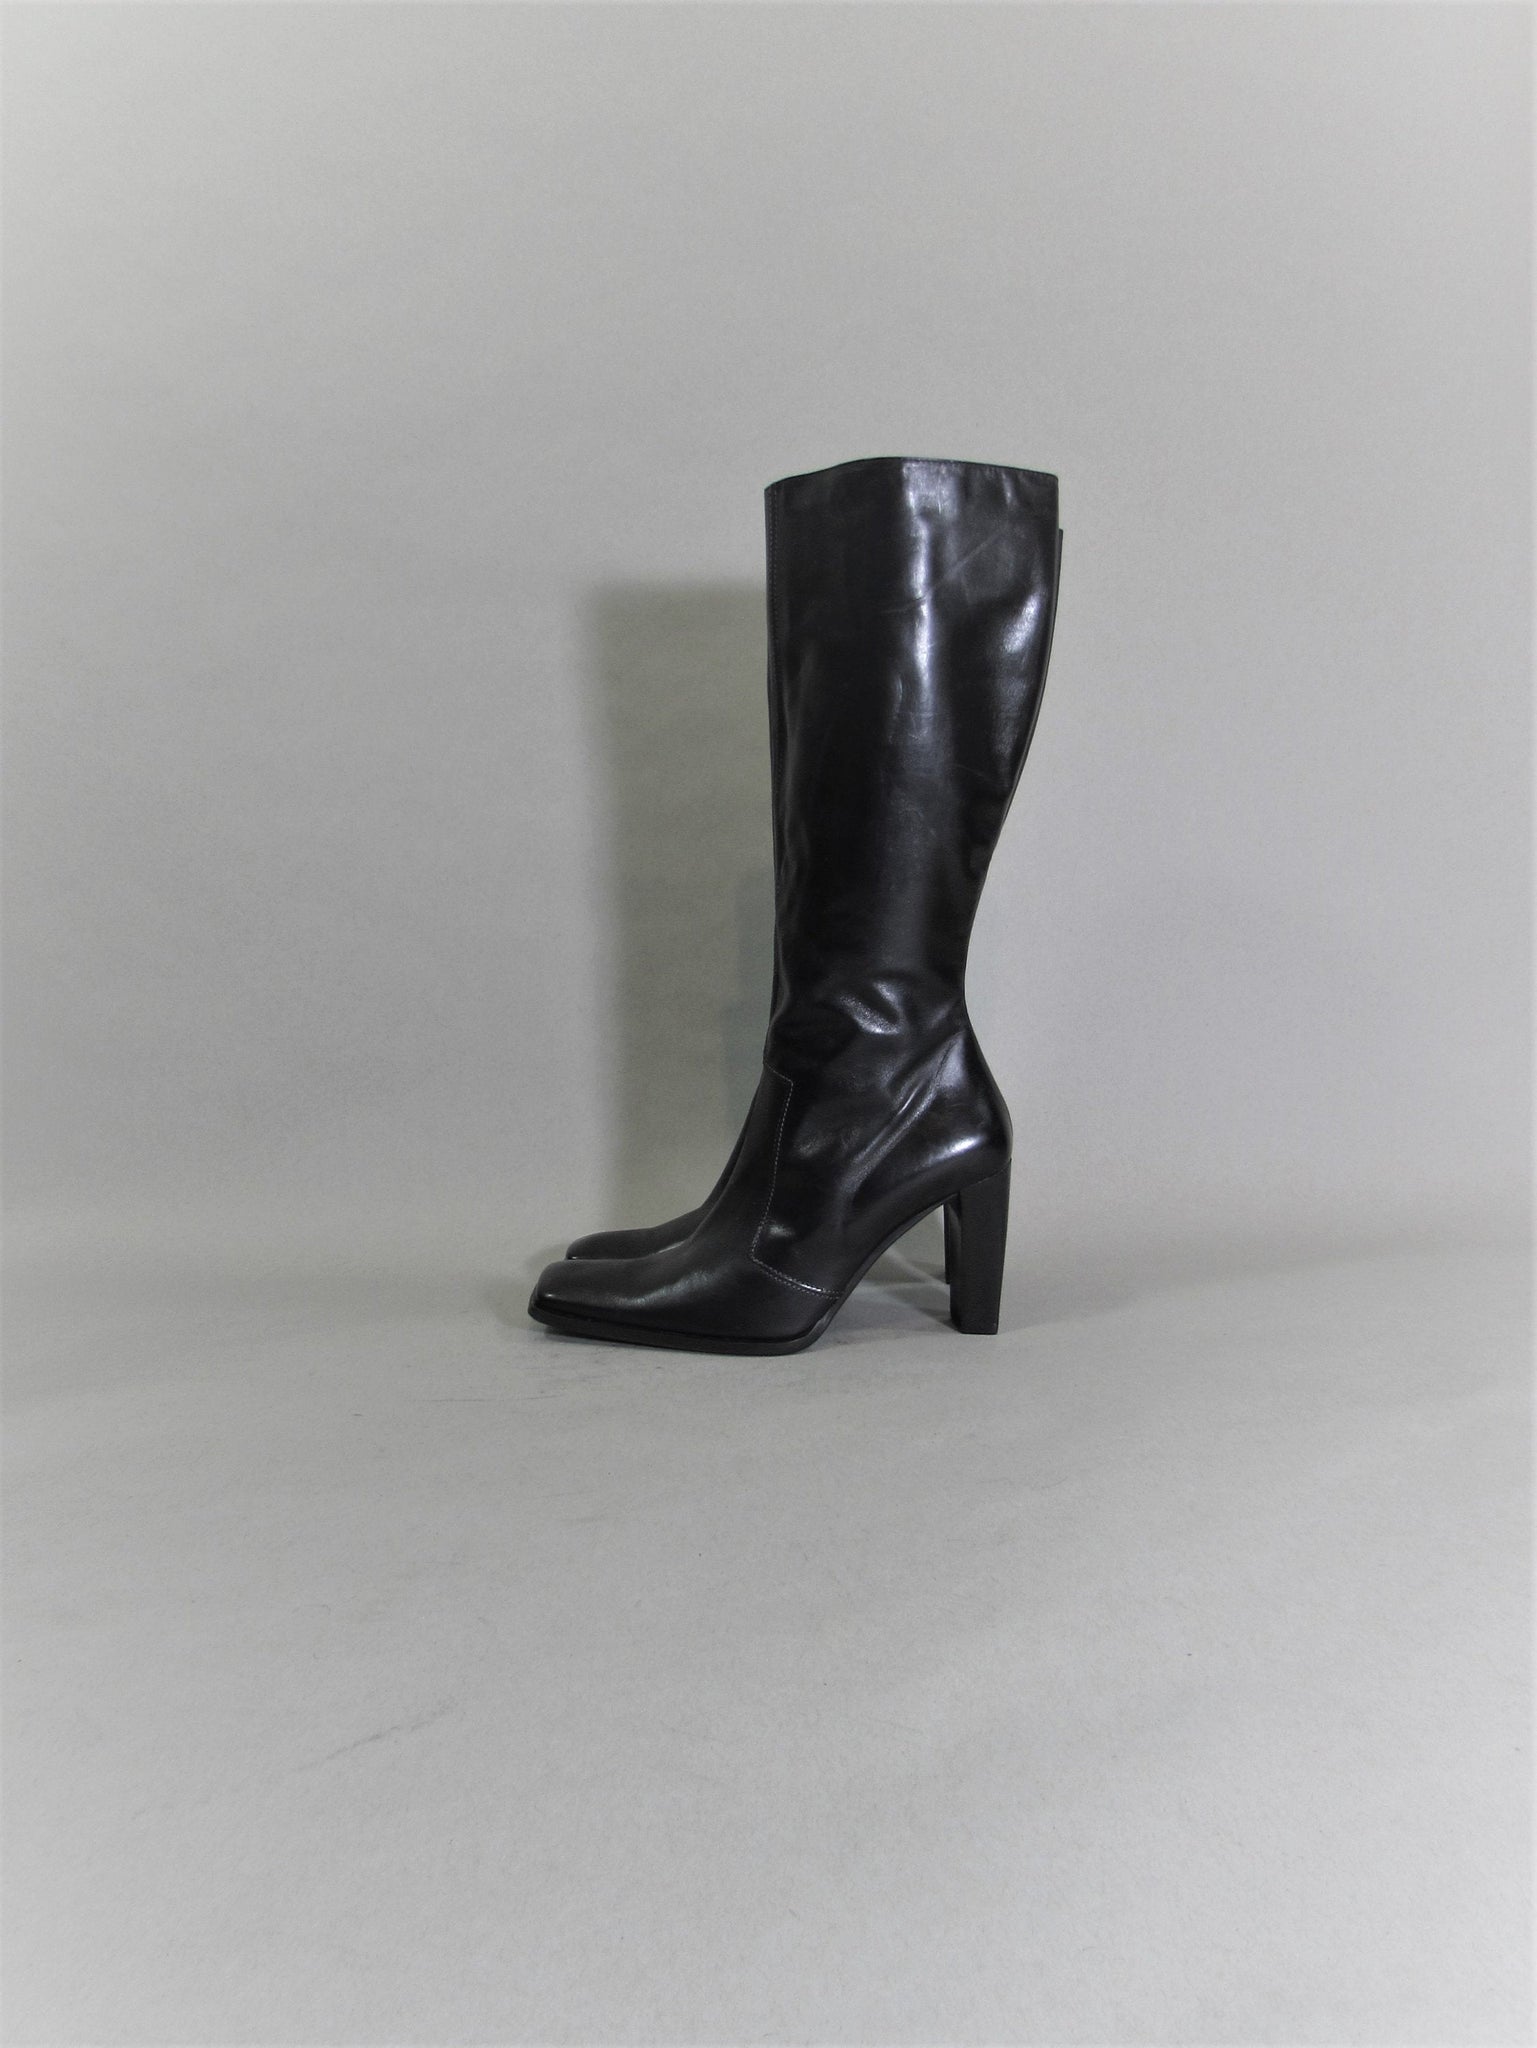 Vintage 90s Knee HIgh Square Toe High Heel Boots. Available at vintage90s.com